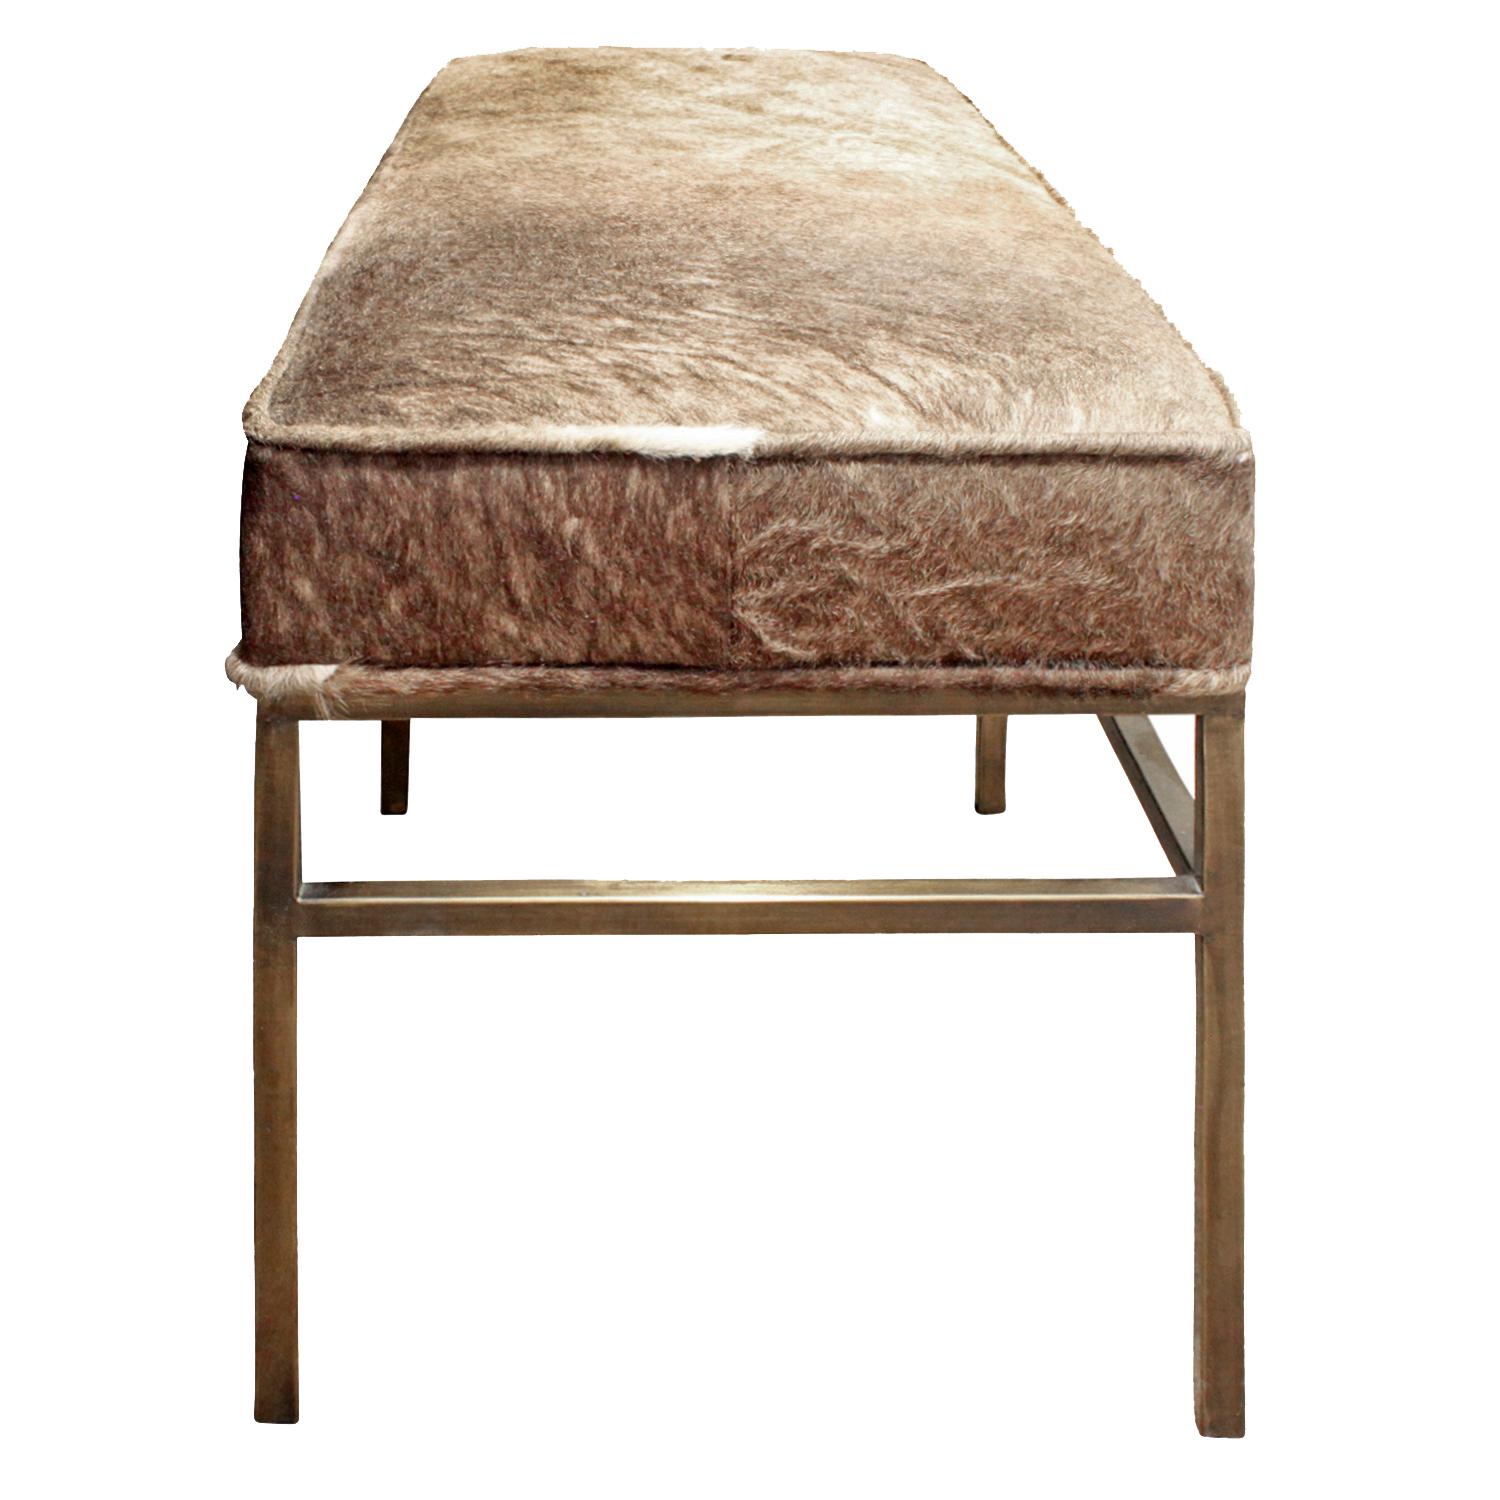 Mid-Century Modern Architectural Bench in Pony Skin with Bronze Base, 1970s